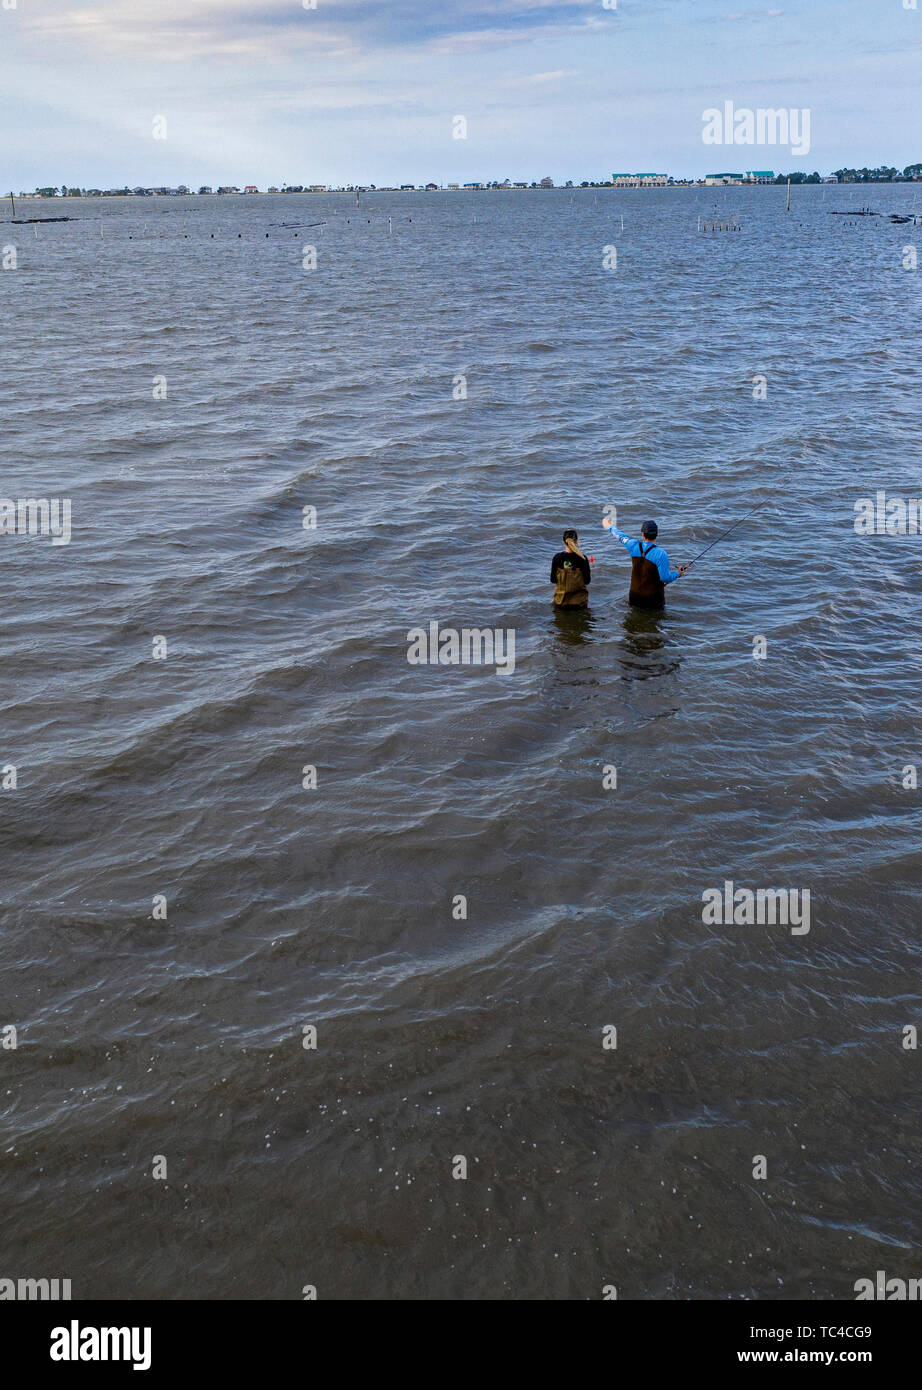 Alligator Point, Florida - Two people fish in Alligator Harbor on the Gulf of Mexico. Stock Photo